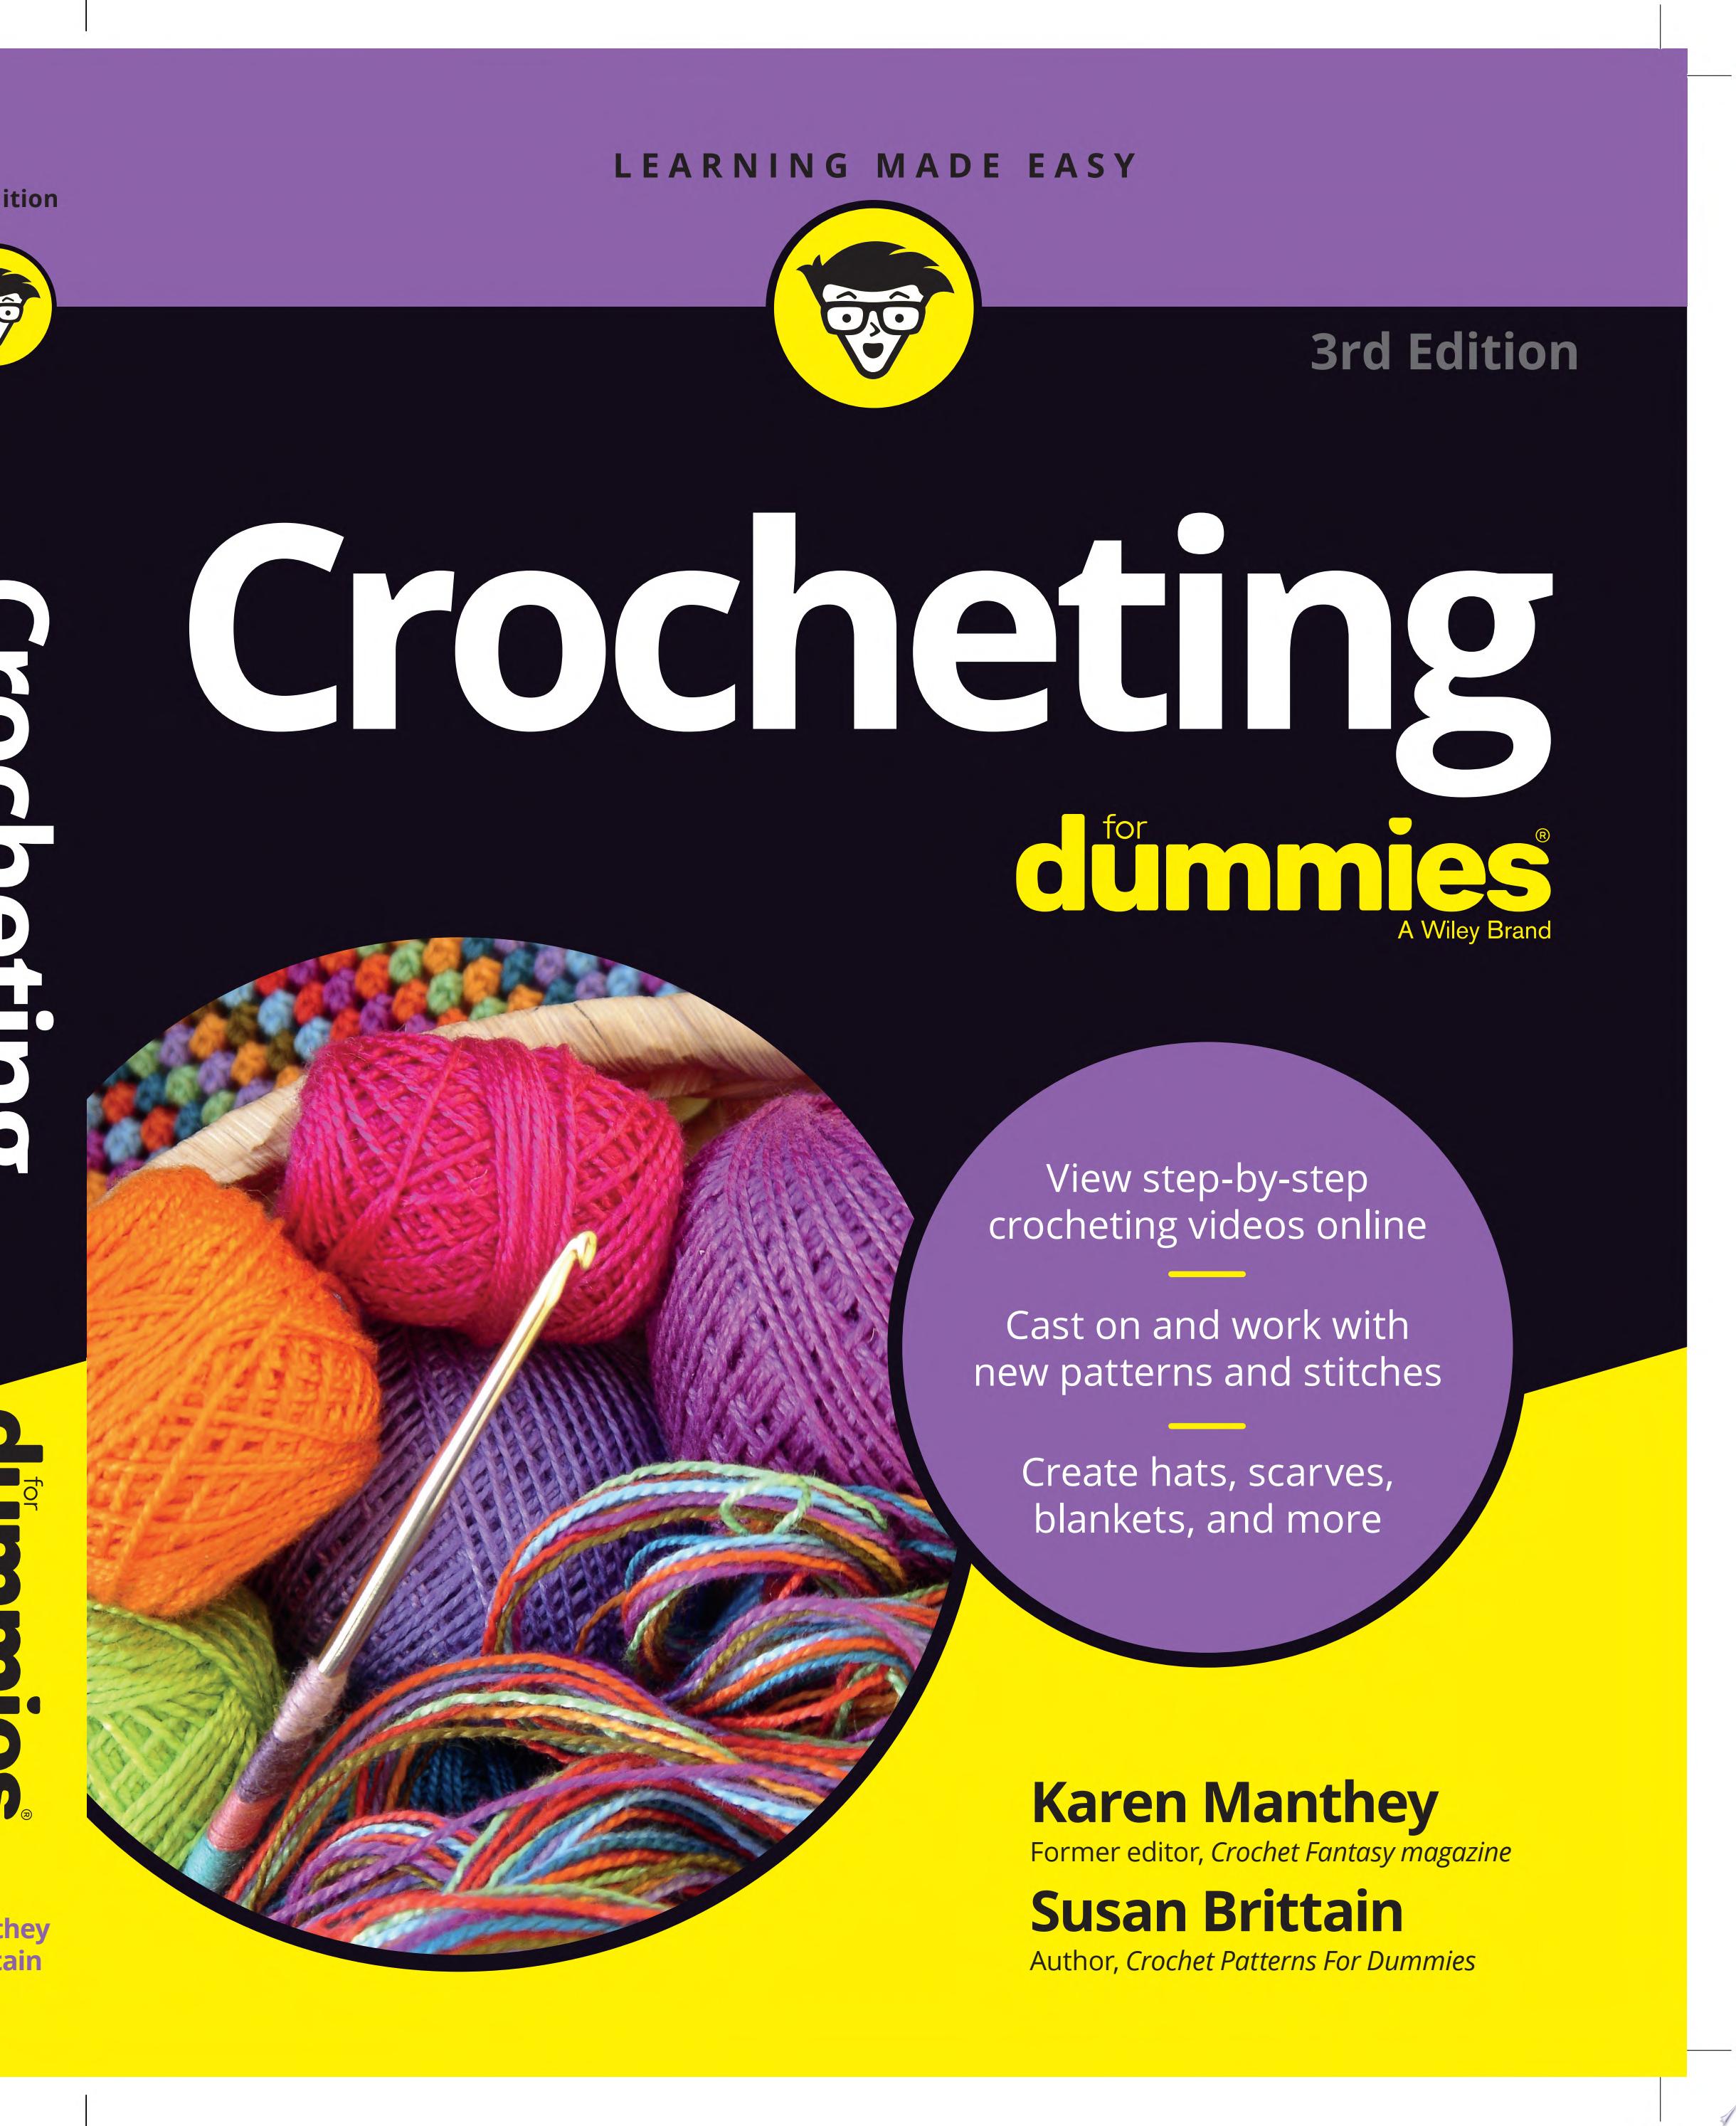 Image for "Crocheting For Dummies with Online Videos"